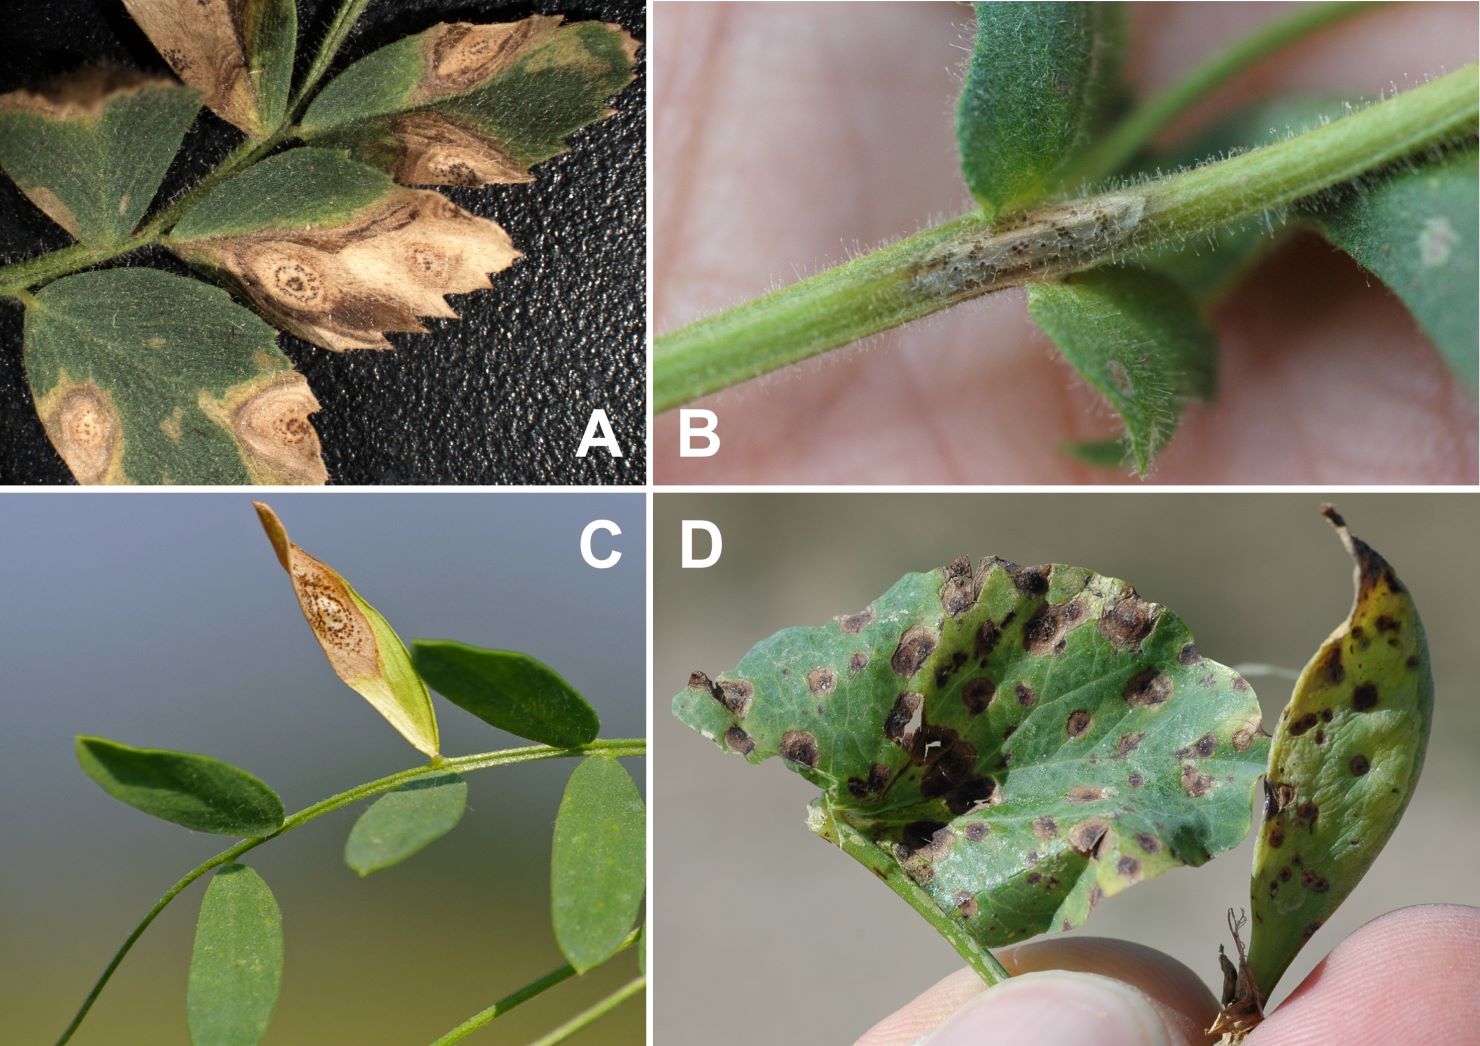 Ascochyta blight symptoms, showing two images with concentric rings on all above ground parts of the plant, and two images of Ascochyta lesions on lentil and pea